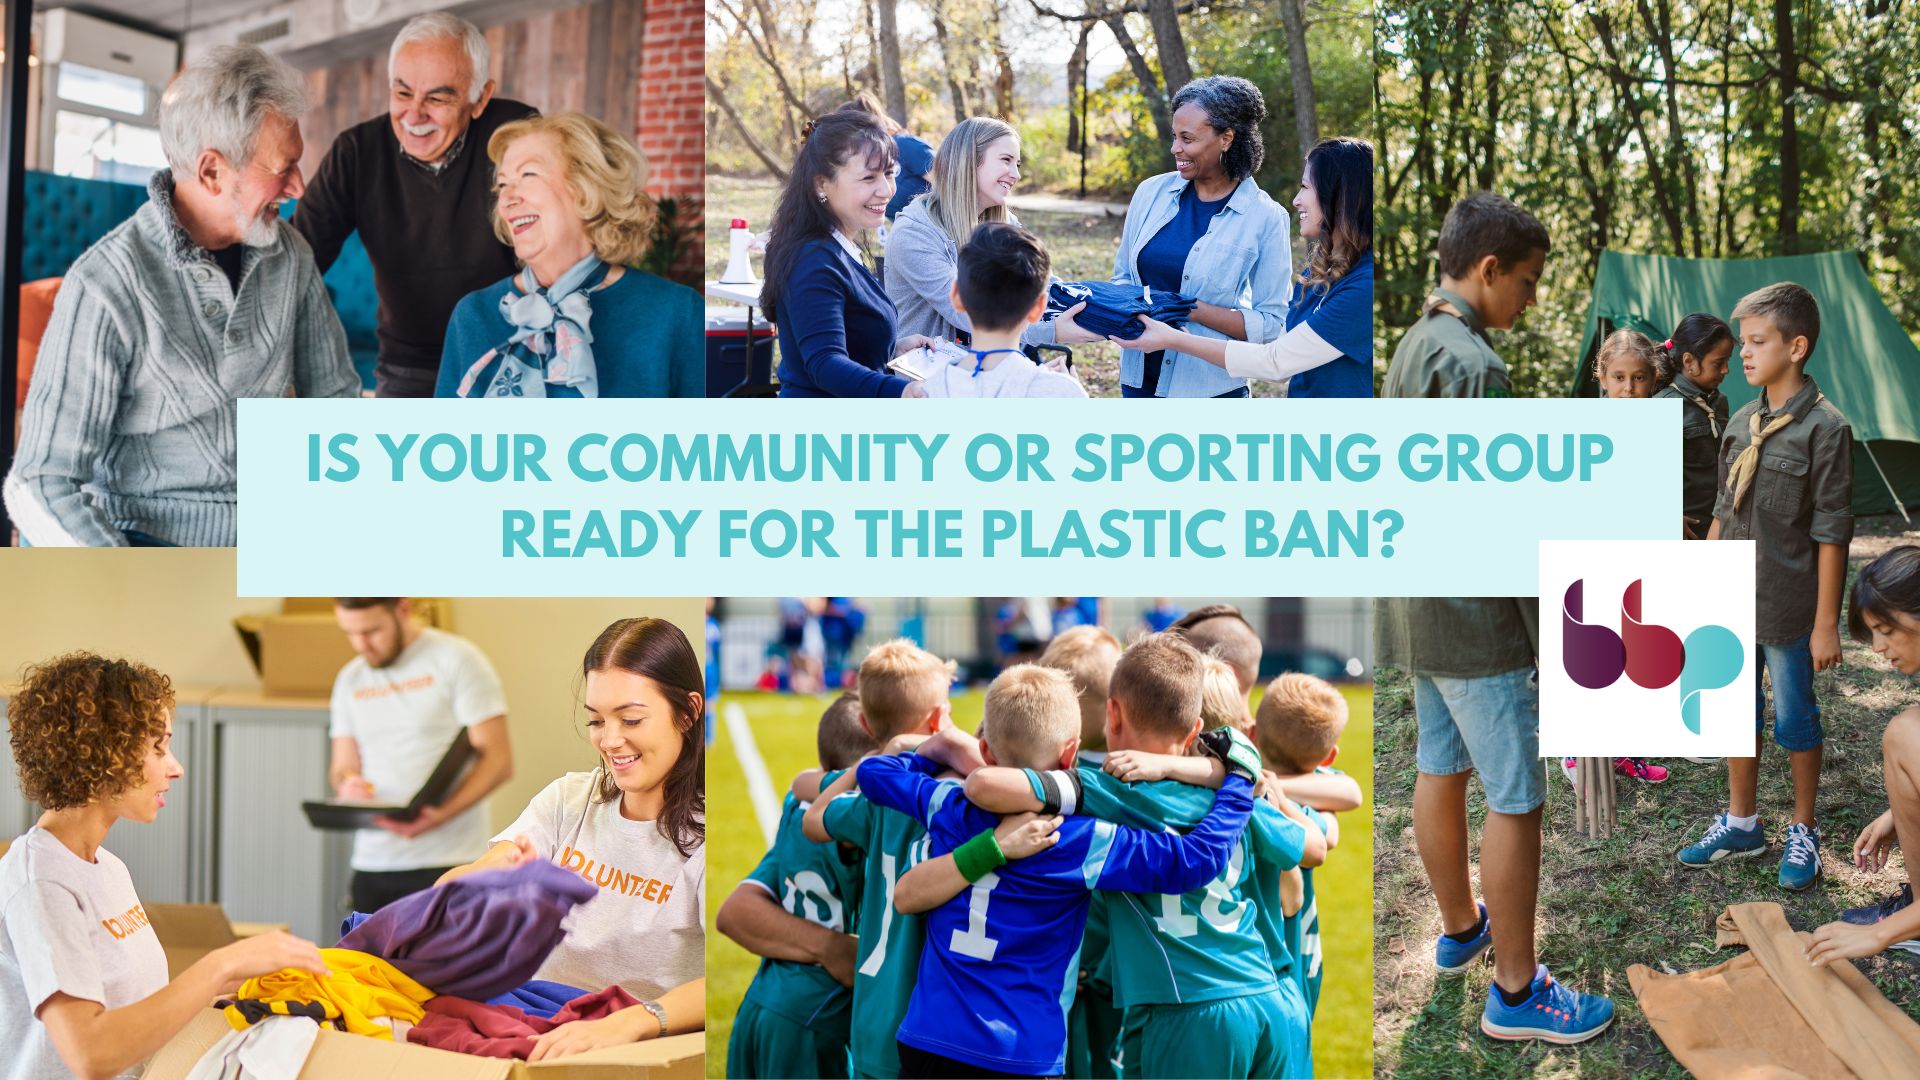 Sporting and Community groups – NSW Plastic Bans are coming!